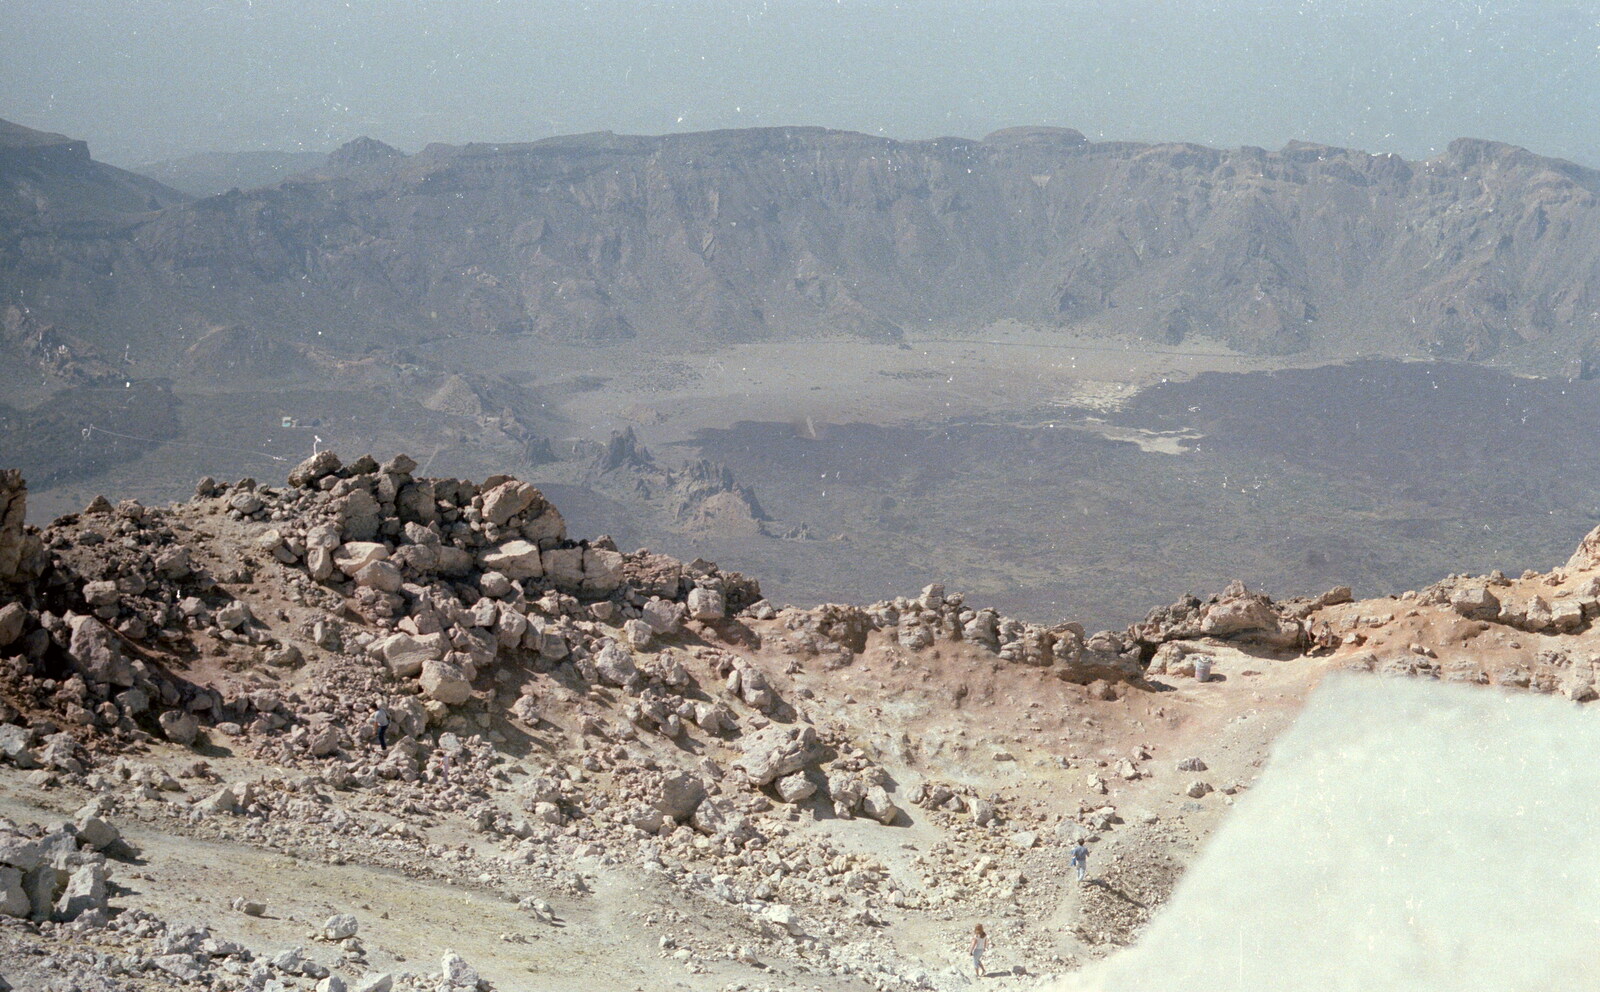 The view from the volcano top, 3,718 metres up from A Holiday in Los Christianos, Tenerife - 19th June 1985